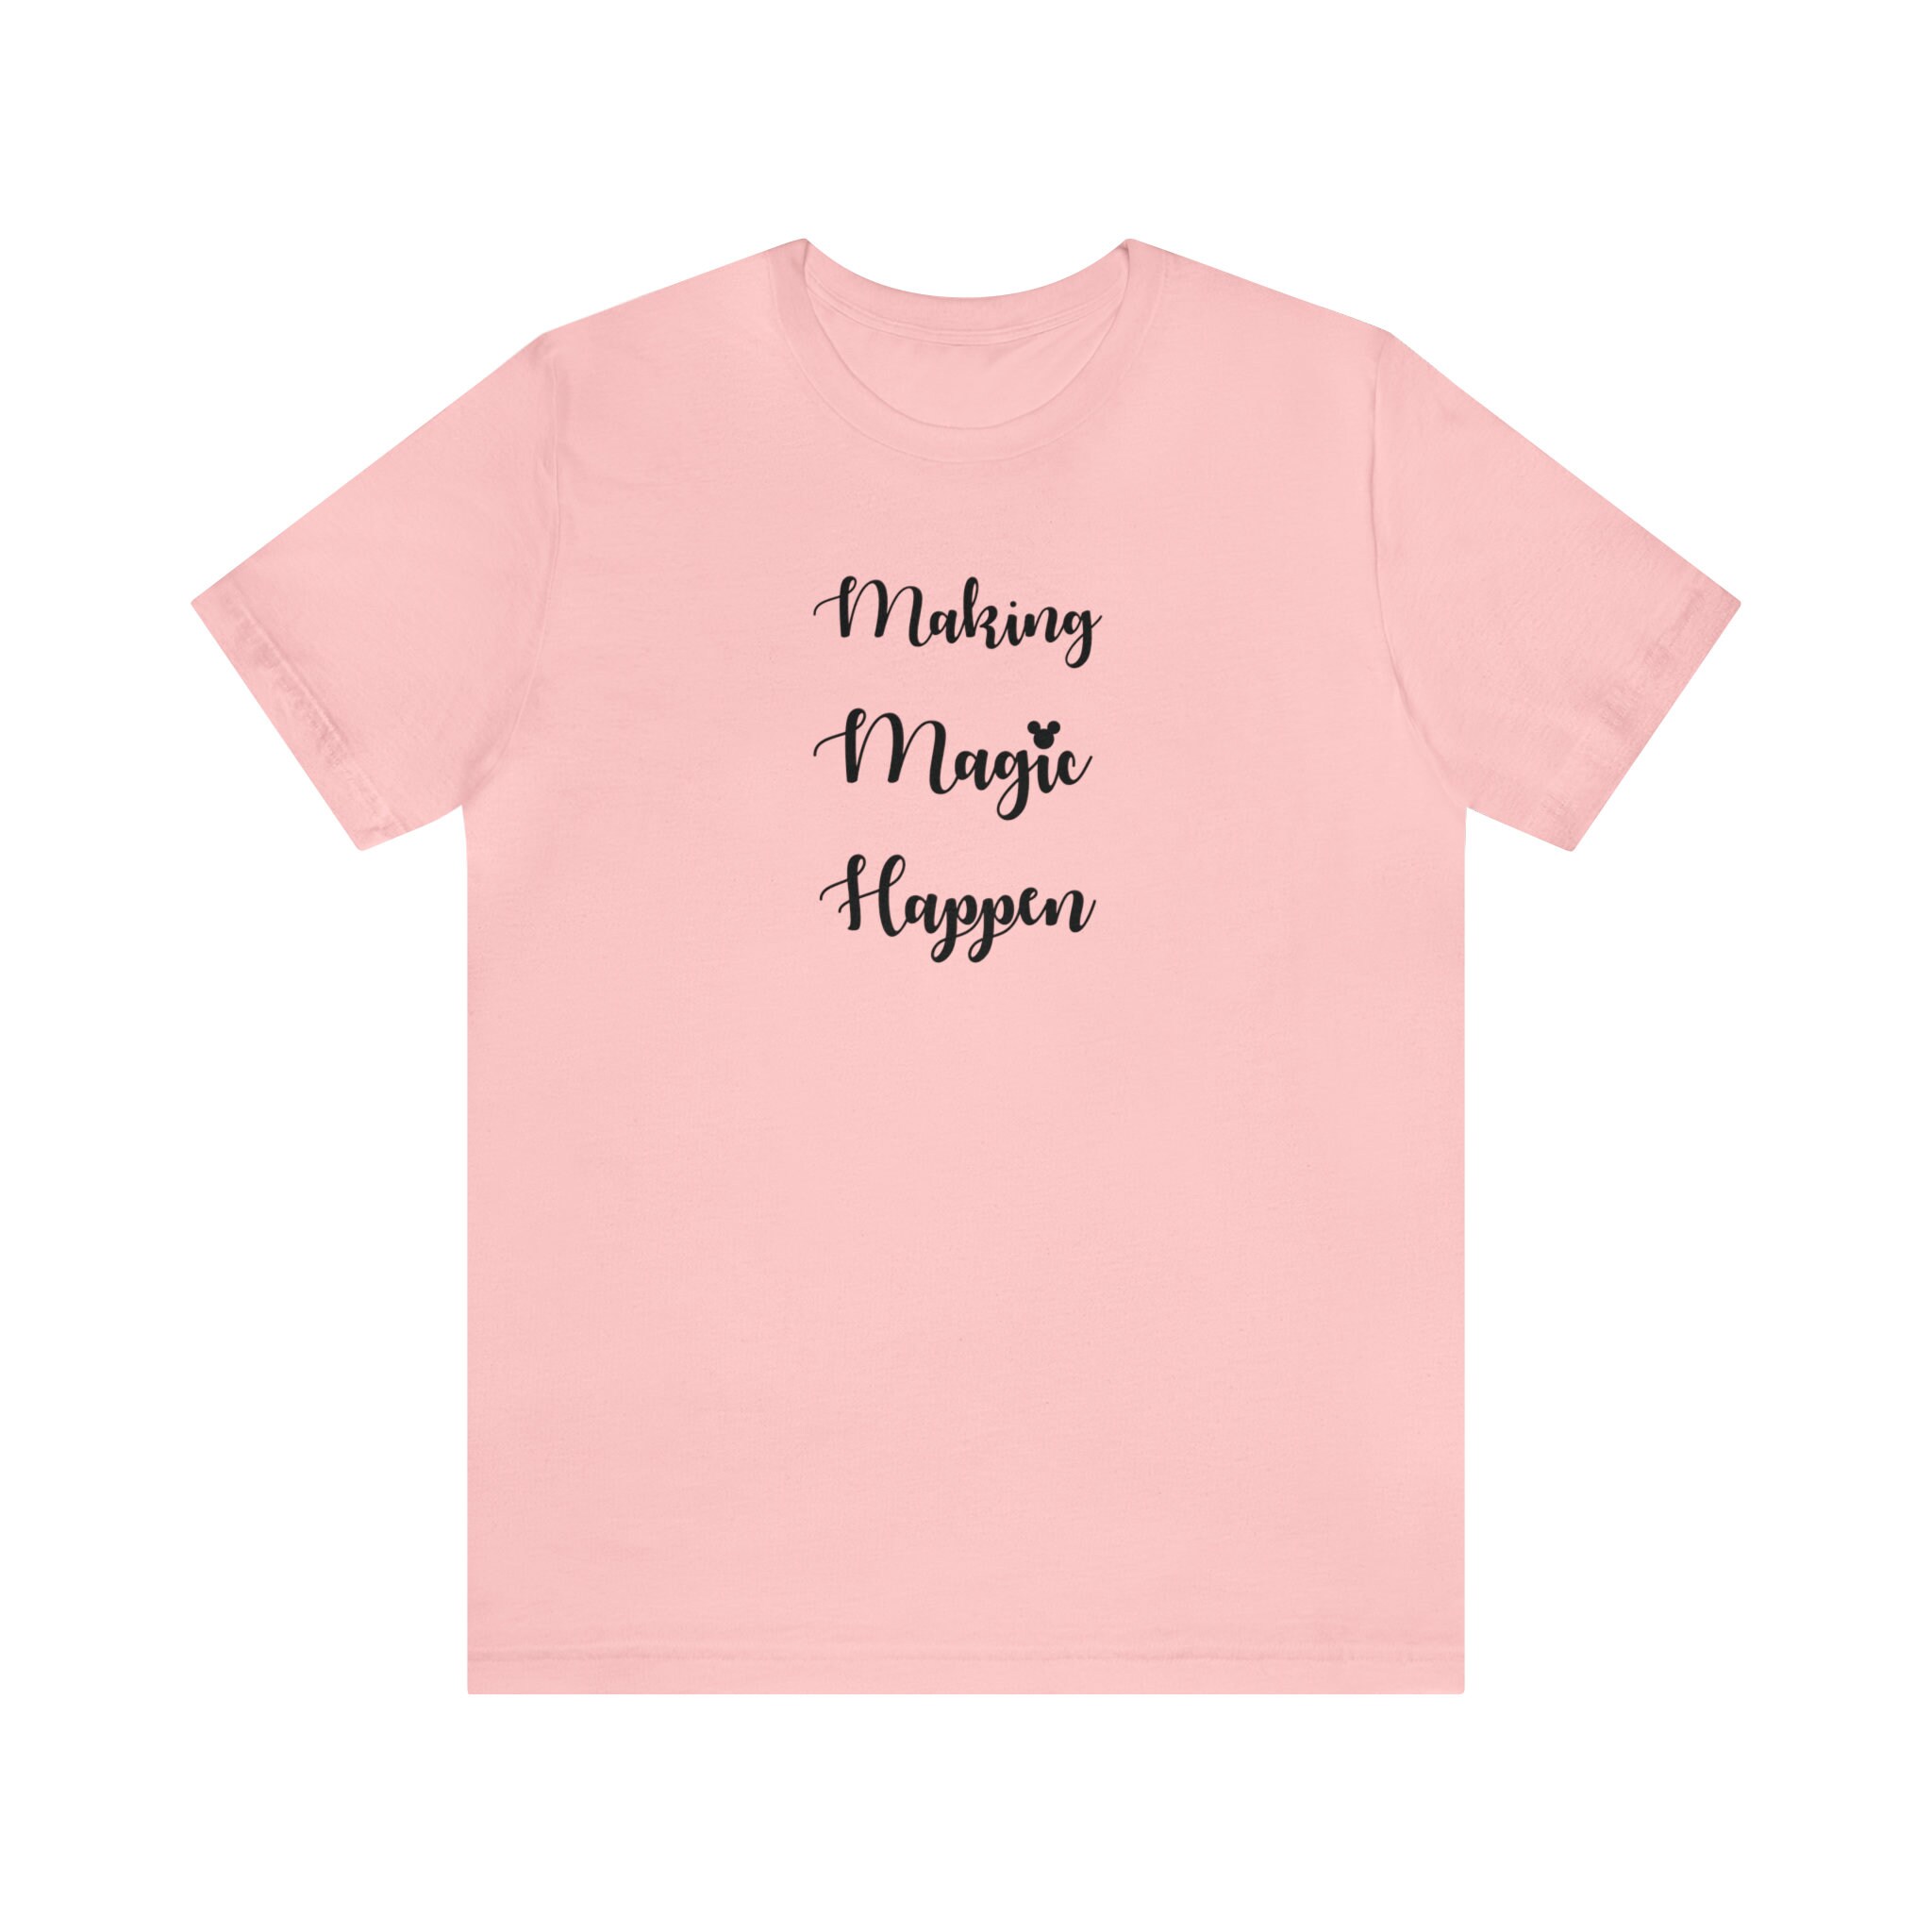 Making Magic Happen Vinyl Sticker, Making Magic Happen Sticker, Vinyl  Sticker, Witch Stickers, Witchy Stickers, Witch Vibes, Holographic 